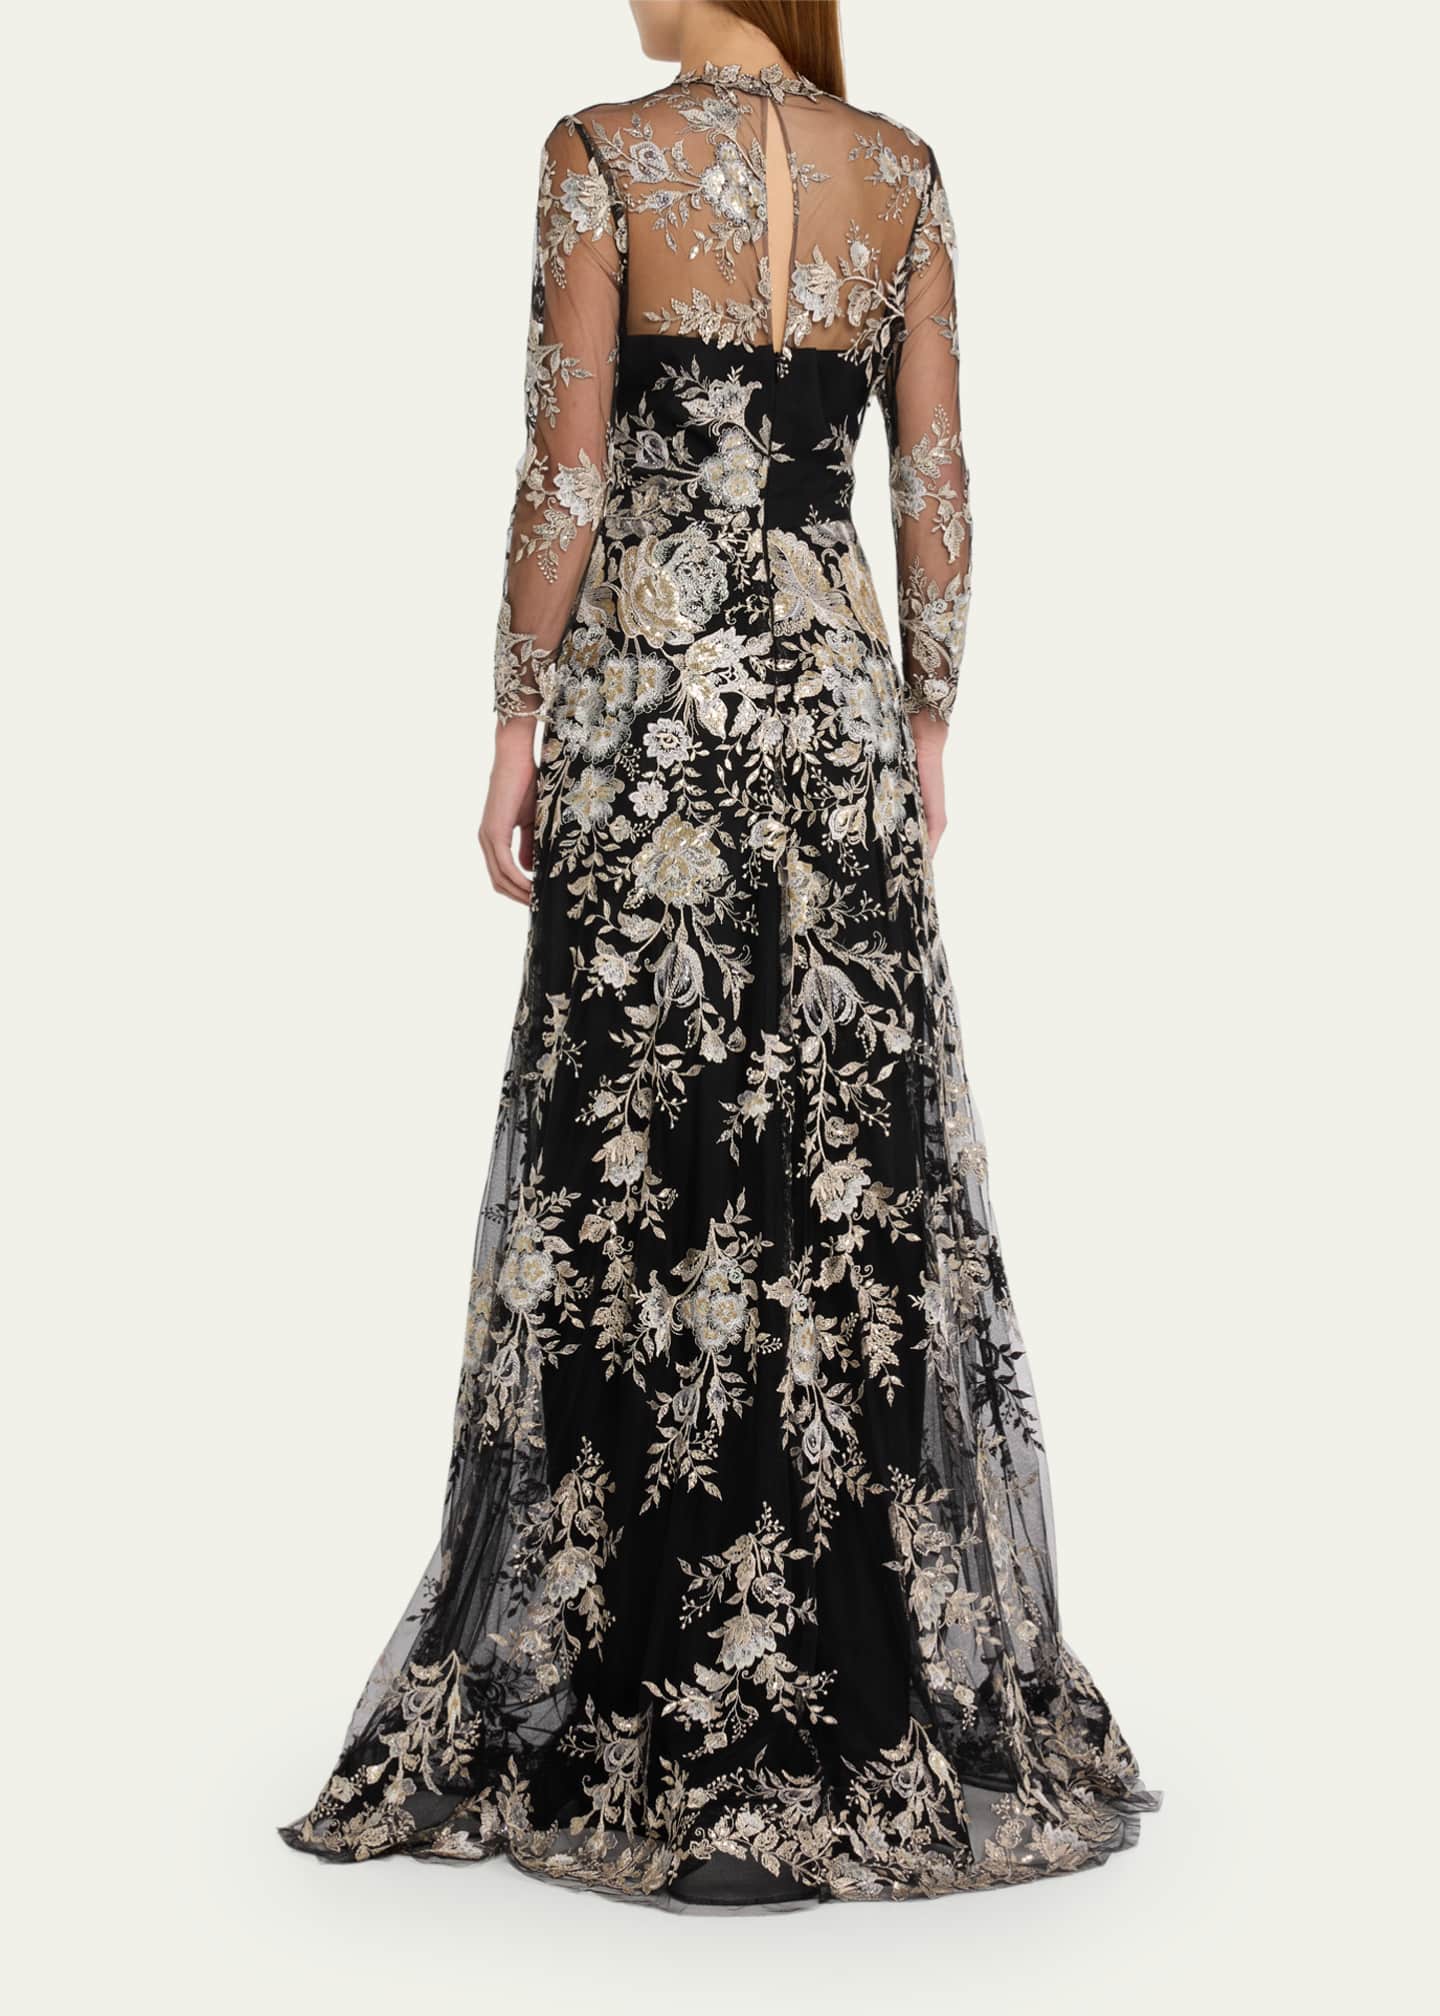 Rickie Freeman for Teri Jon Floral-Embroidered Mock-Neck Tulle Gown